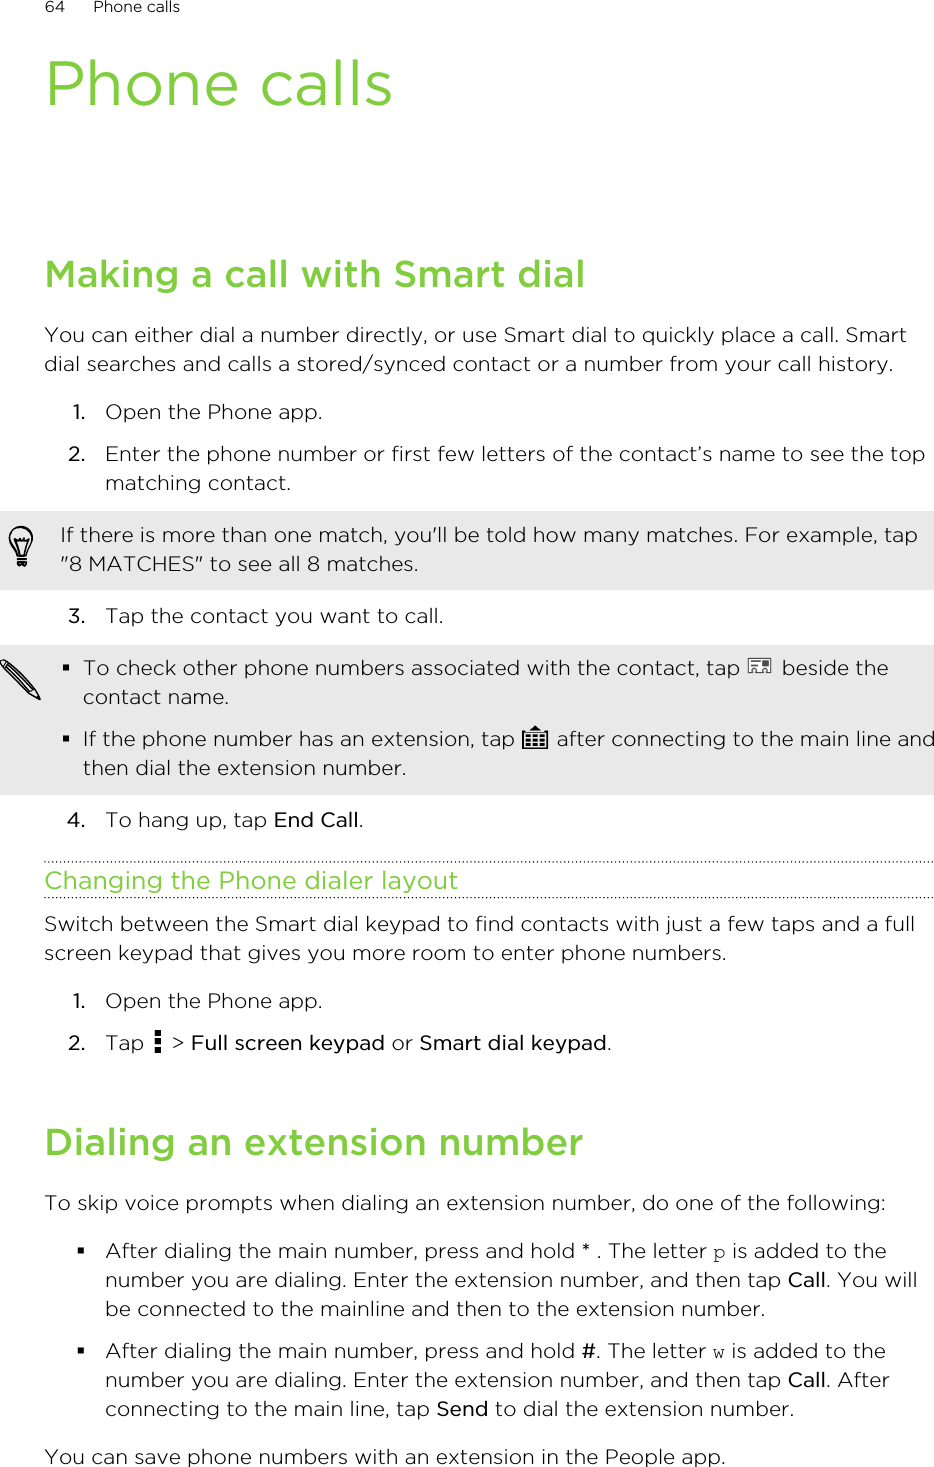 Phone callsMaking a call with Smart dialYou can either dial a number directly, or use Smart dial to quickly place a call. Smartdial searches and calls a stored/synced contact or a number from your call history.1. Open the Phone app.2. Enter the phone number or first few letters of the contact’s name to see the topmatching contact. If there is more than one match, you&apos;ll be told how many matches. For example, tap&quot;8 MATCHES&quot; to see all 8 matches.3. Tap the contact you want to call. §To check other phone numbers associated with the contact, tap   beside thecontact name.§If the phone number has an extension, tap   after connecting to the main line andthen dial the extension number.4. To hang up, tap End Call.Changing the Phone dialer layoutSwitch between the Smart dial keypad to find contacts with just a few taps and a fullscreen keypad that gives you more room to enter phone numbers.1. Open the Phone app.2. Tap   &gt; Full screen keypad or Smart dial keypad.Dialing an extension numberTo skip voice prompts when dialing an extension number, do one of the following:§After dialing the main number, press and hold * . The letter p is added to thenumber you are dialing. Enter the extension number, and then tap Call. You willbe connected to the mainline and then to the extension number.§After dialing the main number, press and hold #. The letter w is added to thenumber you are dialing. Enter the extension number, and then tap Call. Afterconnecting to the main line, tap Send to dial the extension number.You can save phone numbers with an extension in the People app.64 Phone calls